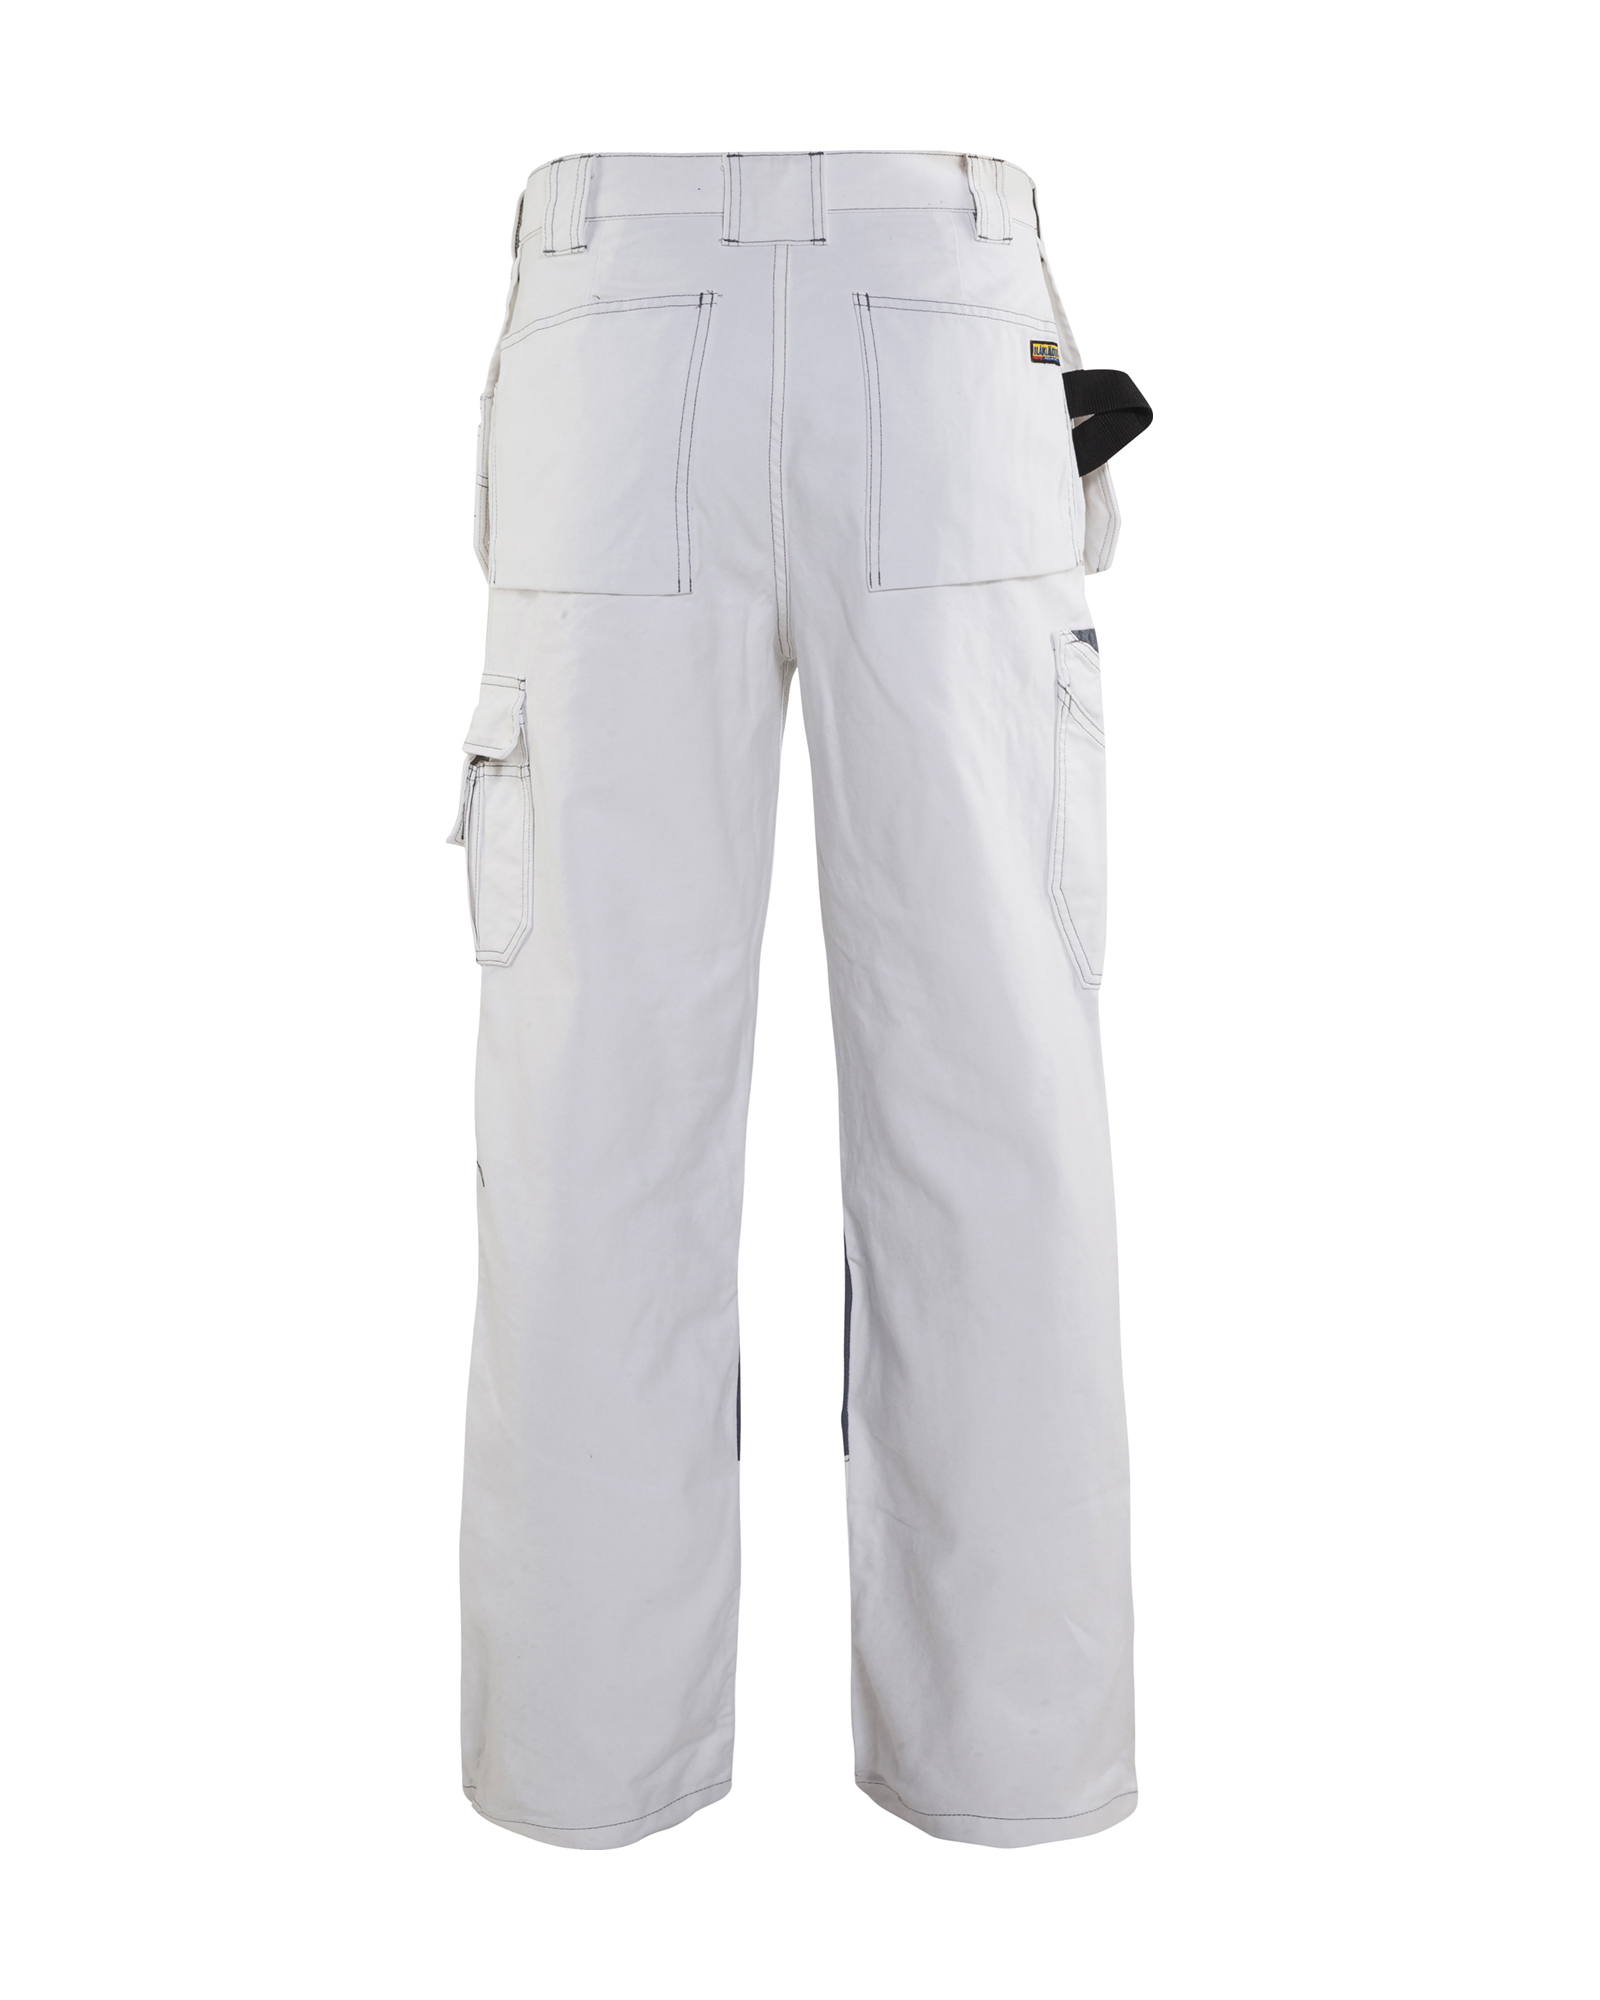 Trade Professional Painters Decorators White Work Trousers Pants Knee Pockets 